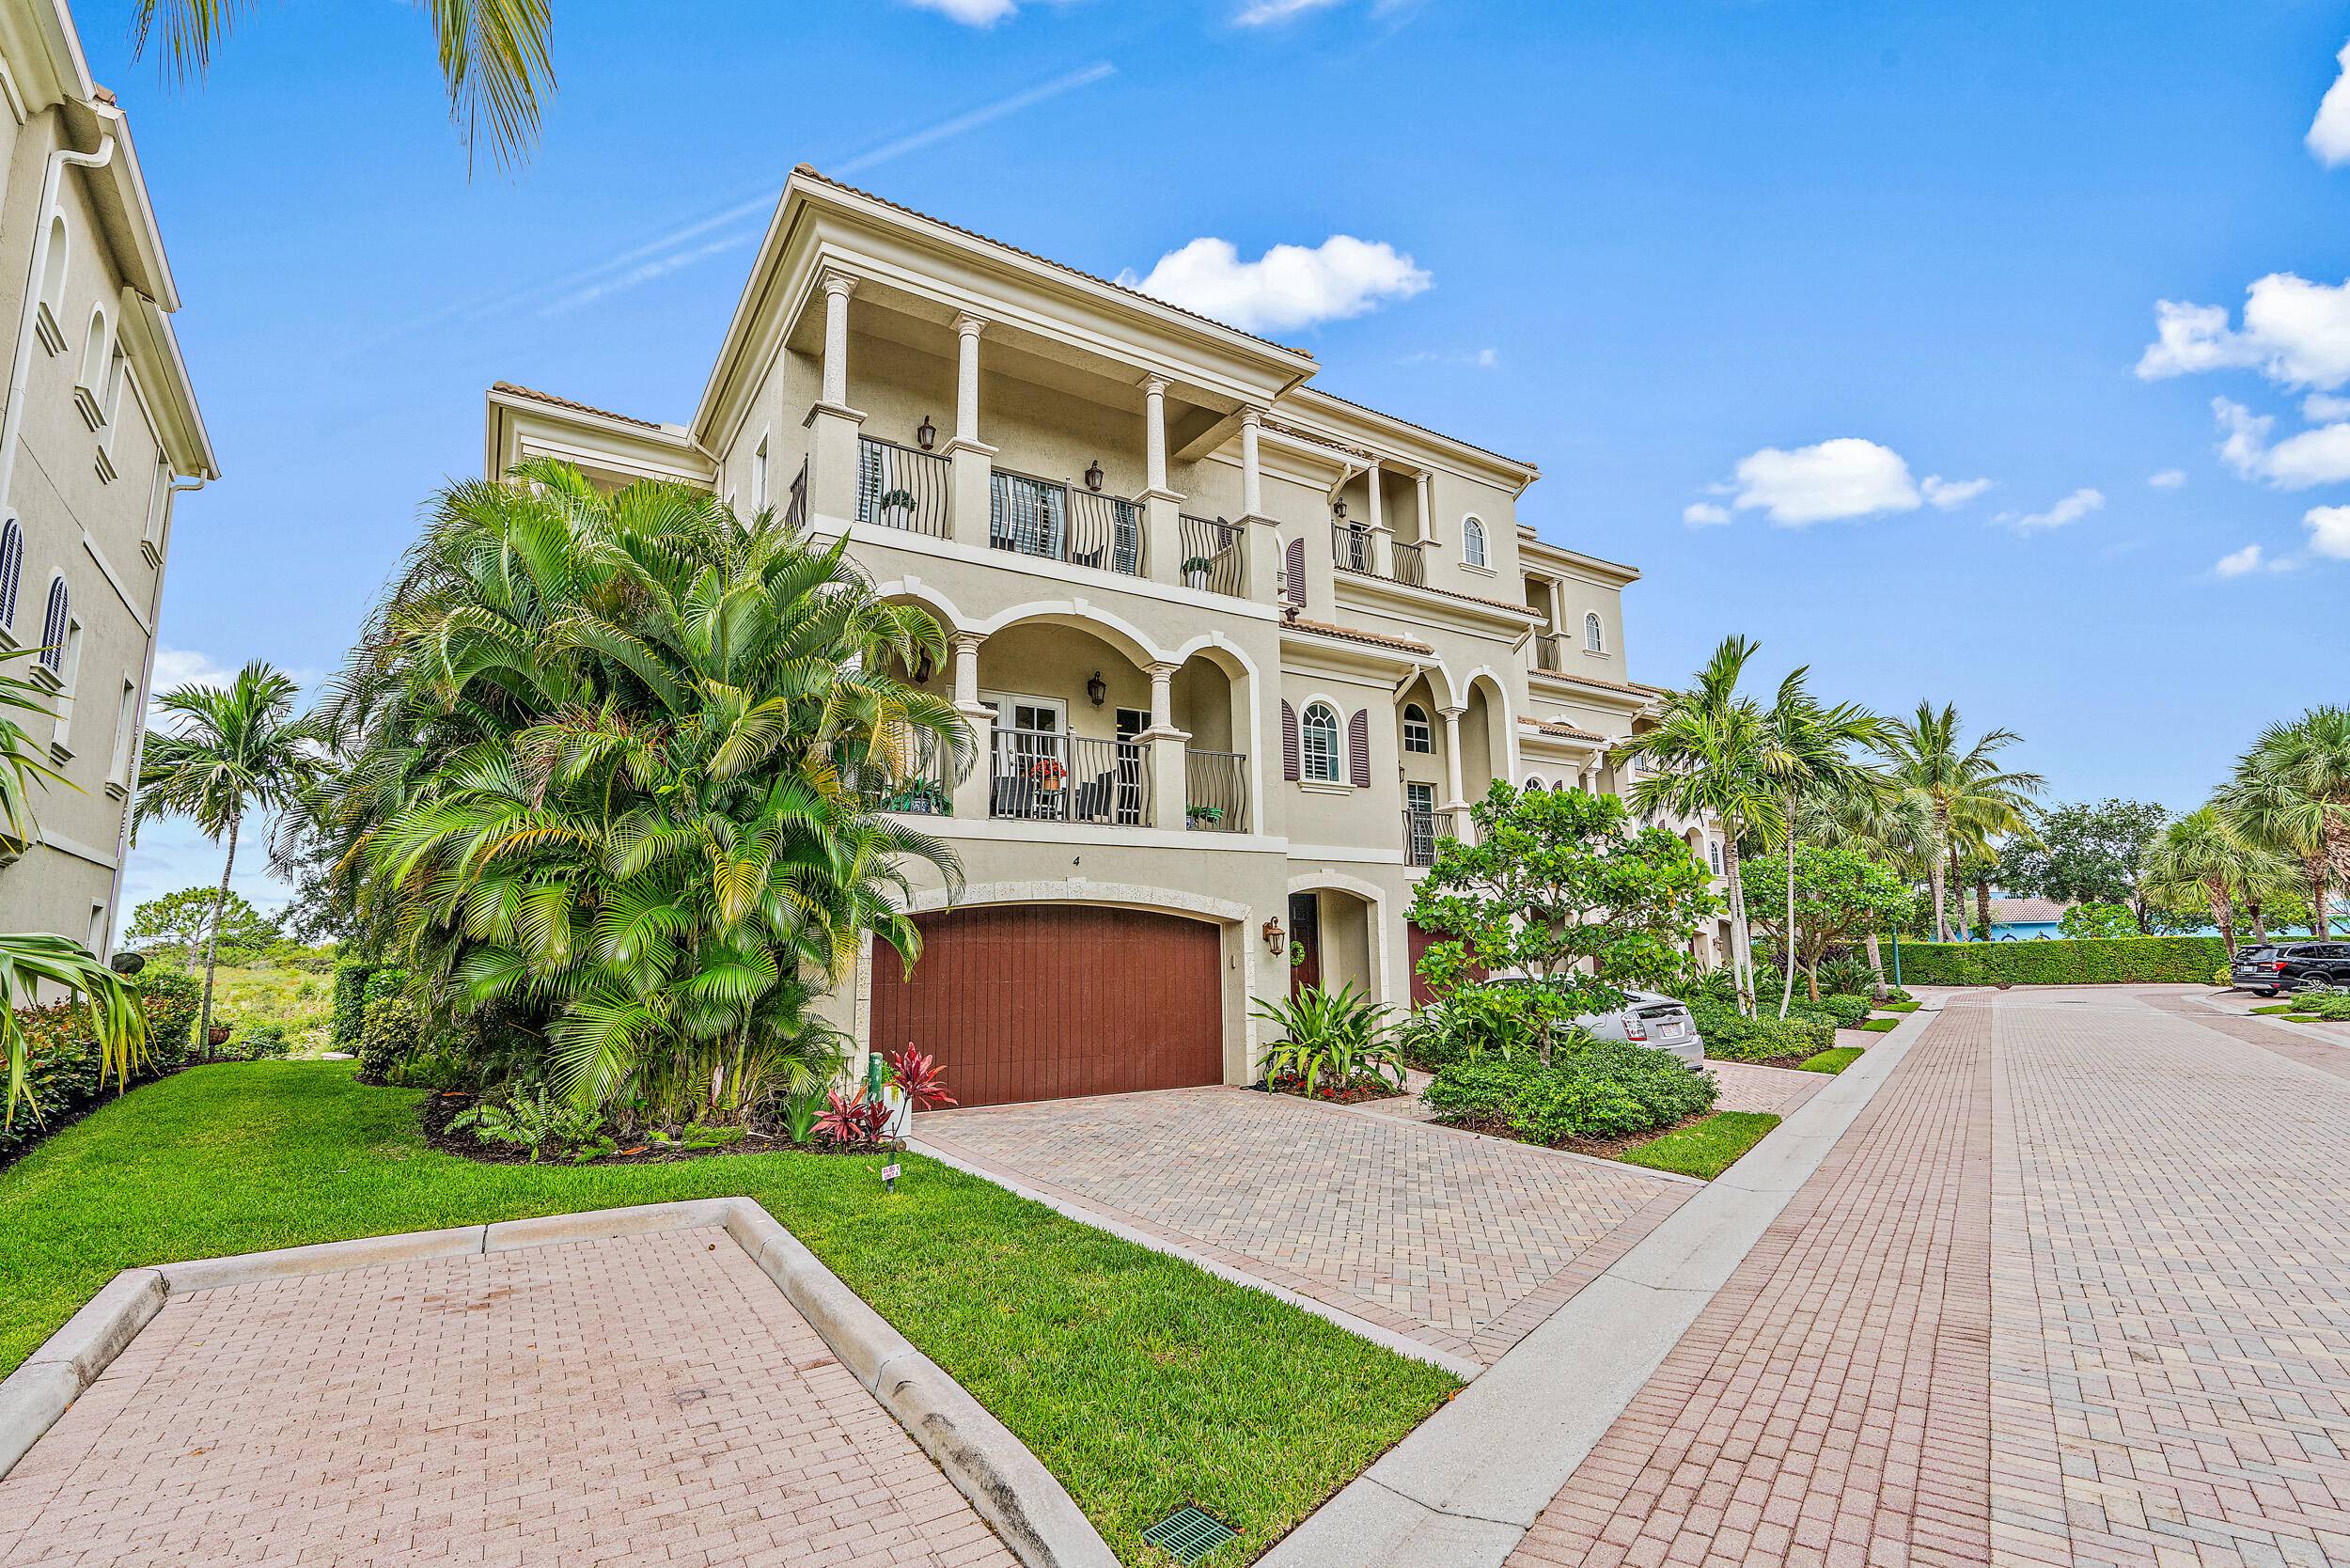 Wow ! This beautiful seasonal rental is situated on Jupiter Riverwalk so you can walk or bike to the beach, Jupiter Yacht Club, Harbourside restaurants and shopping.